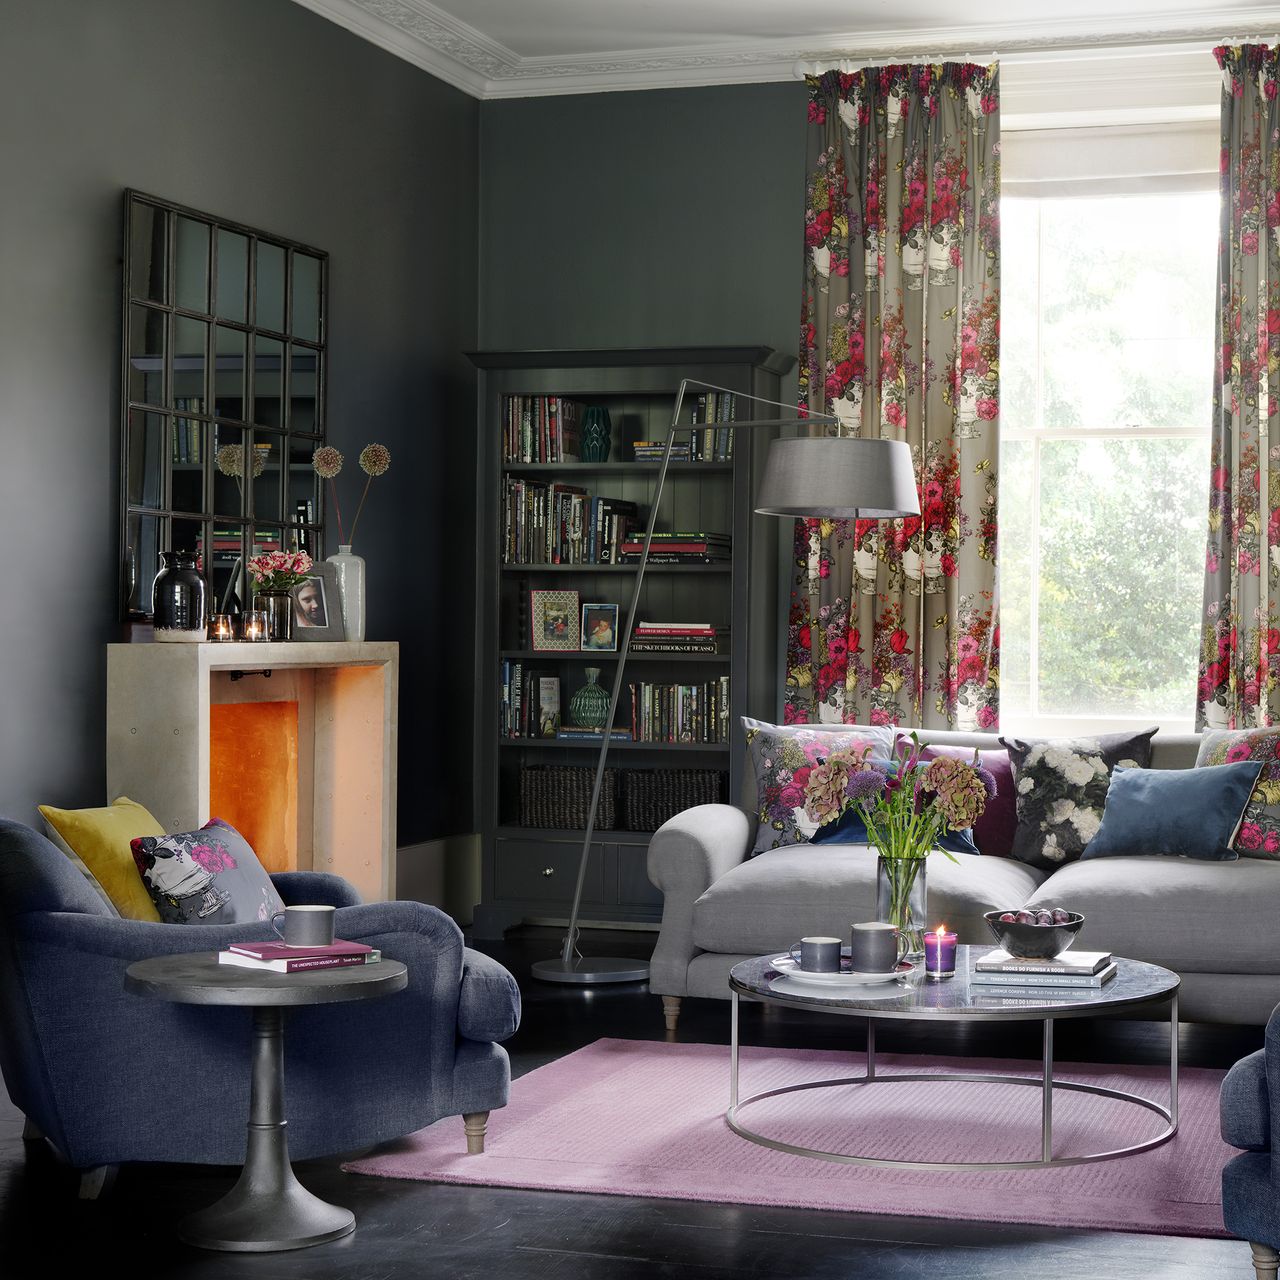 Depressing colours that are ruining your mood | Ideal Home